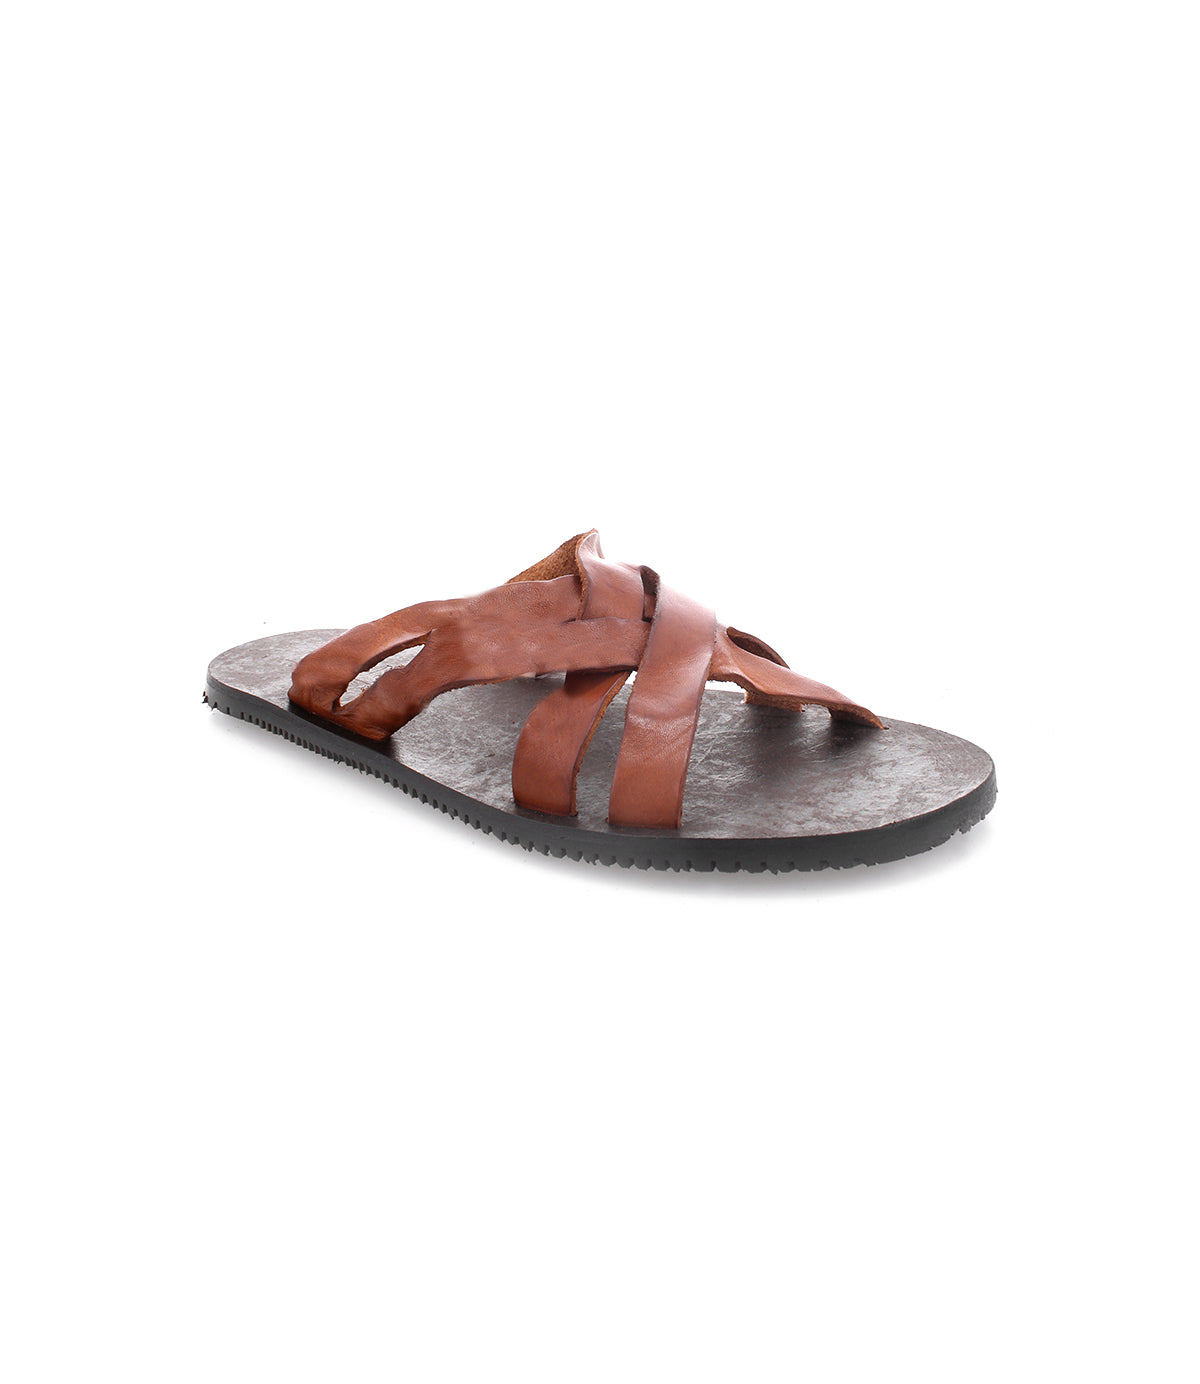 These Impromptu men's brown leather sandals from Bed Stu combine comfort and casual style with their woven leather design.